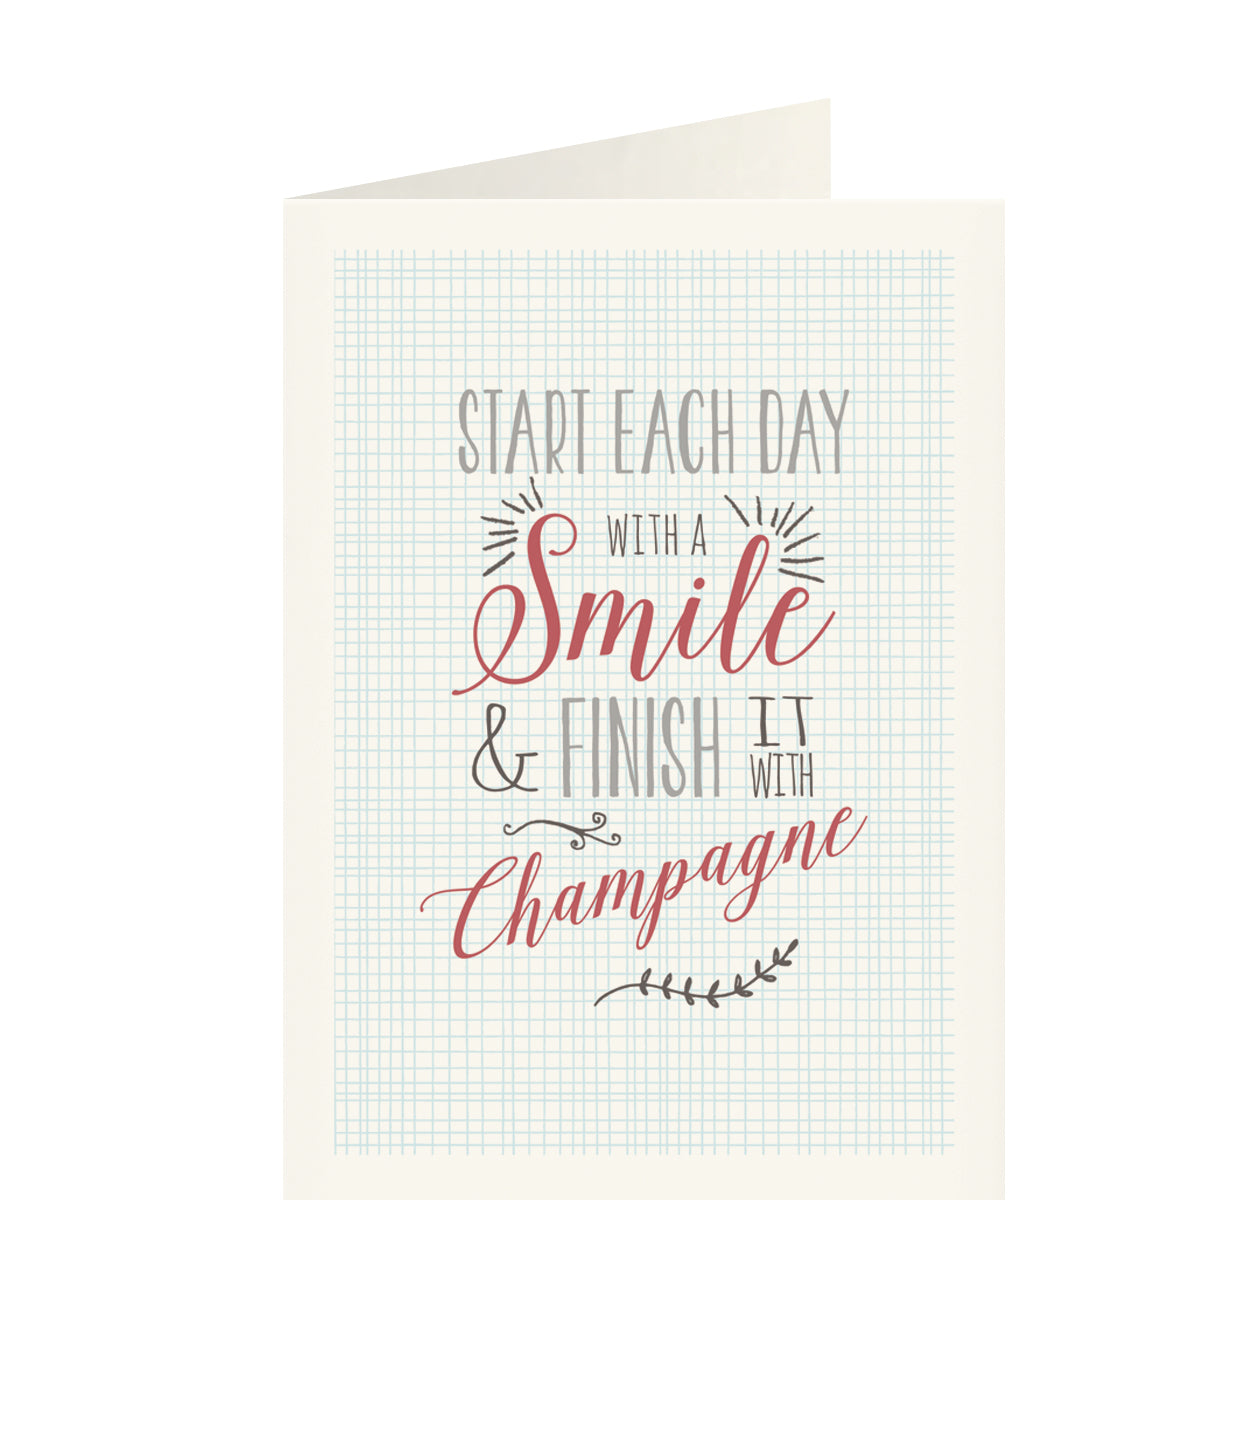 East of India - Just my type greeting card - Start each day with a smile & finish it with champagne